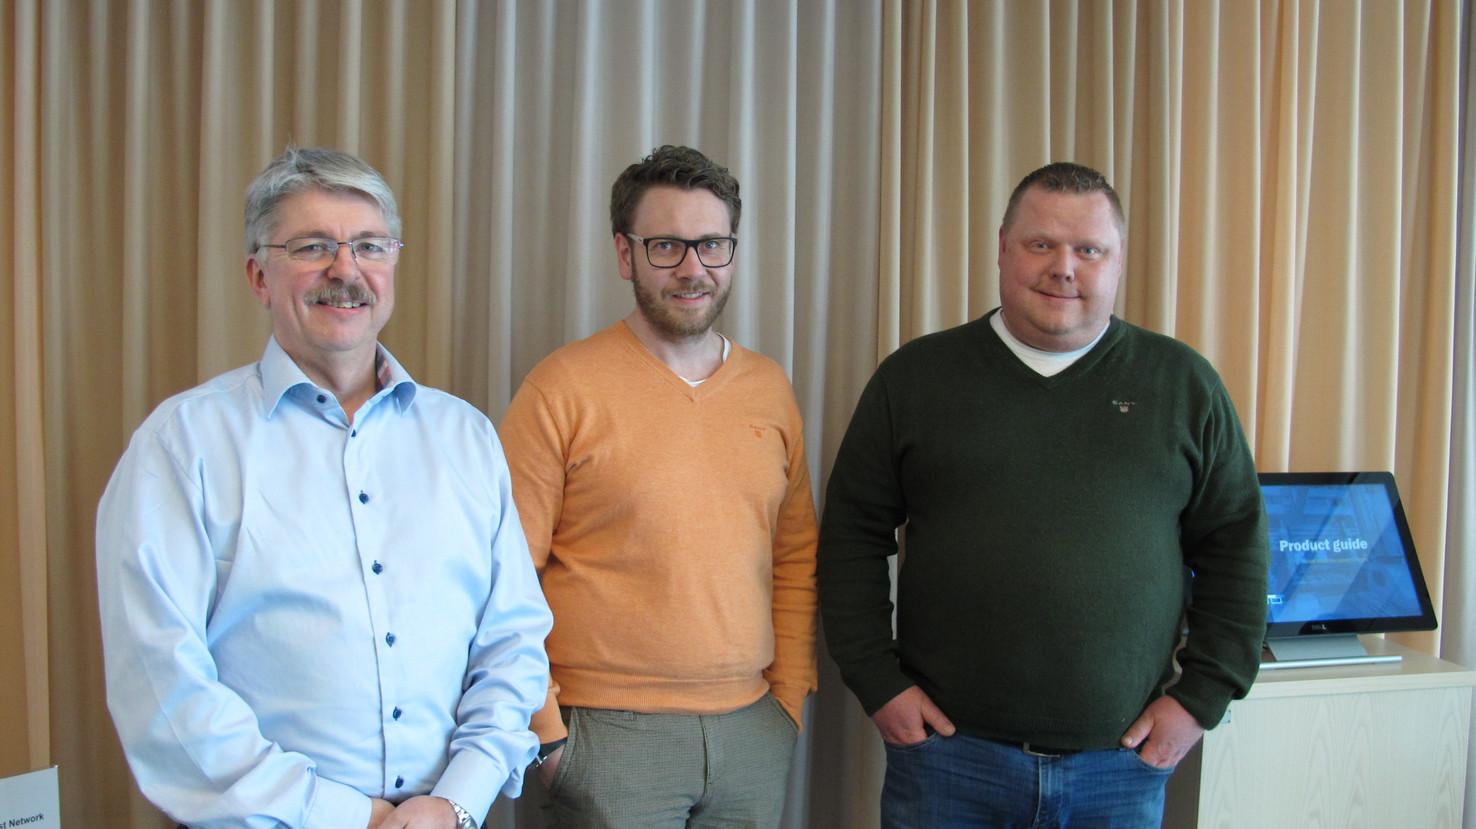 Three new sales managers: Håkan Rydenborg, Andreas Silfversparre and Anders Högbom are strengthening AP&T’s global sales organization. 